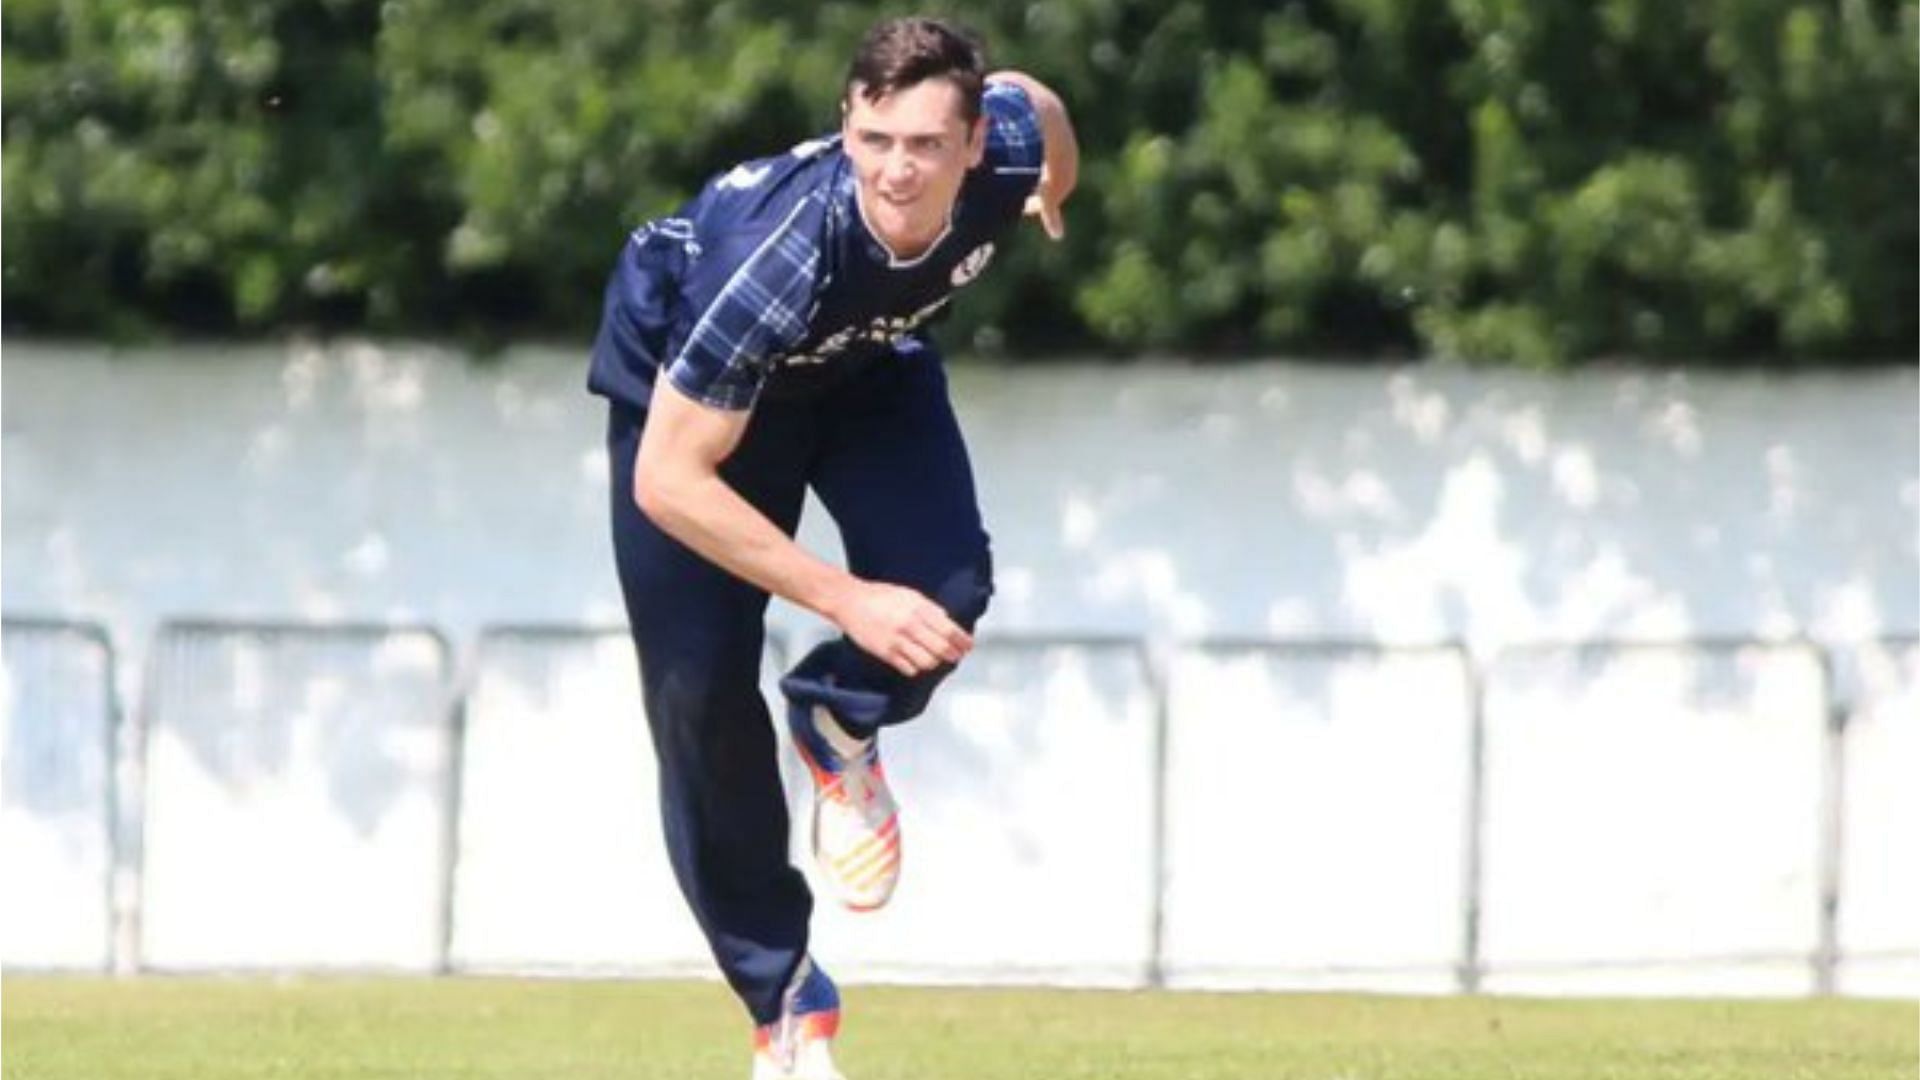 Chris Sole is one of the fastest bowlers to have come out from the emerging nations.